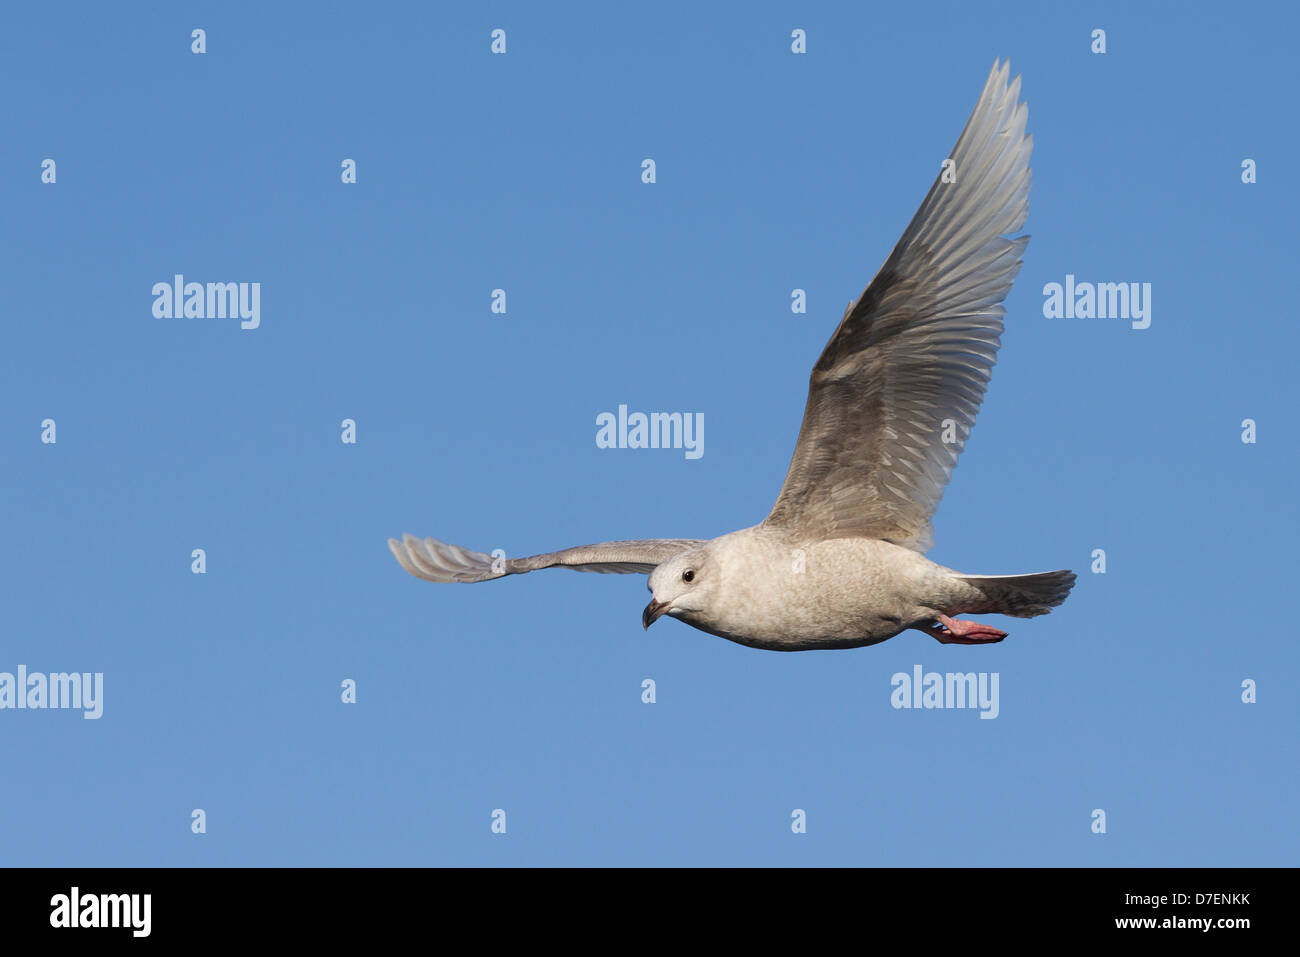 Iceland Gull (Larus glaucoides glaucoides), first winter plumage, in flight over the waters of the Atlantic Ocean Stock Photo